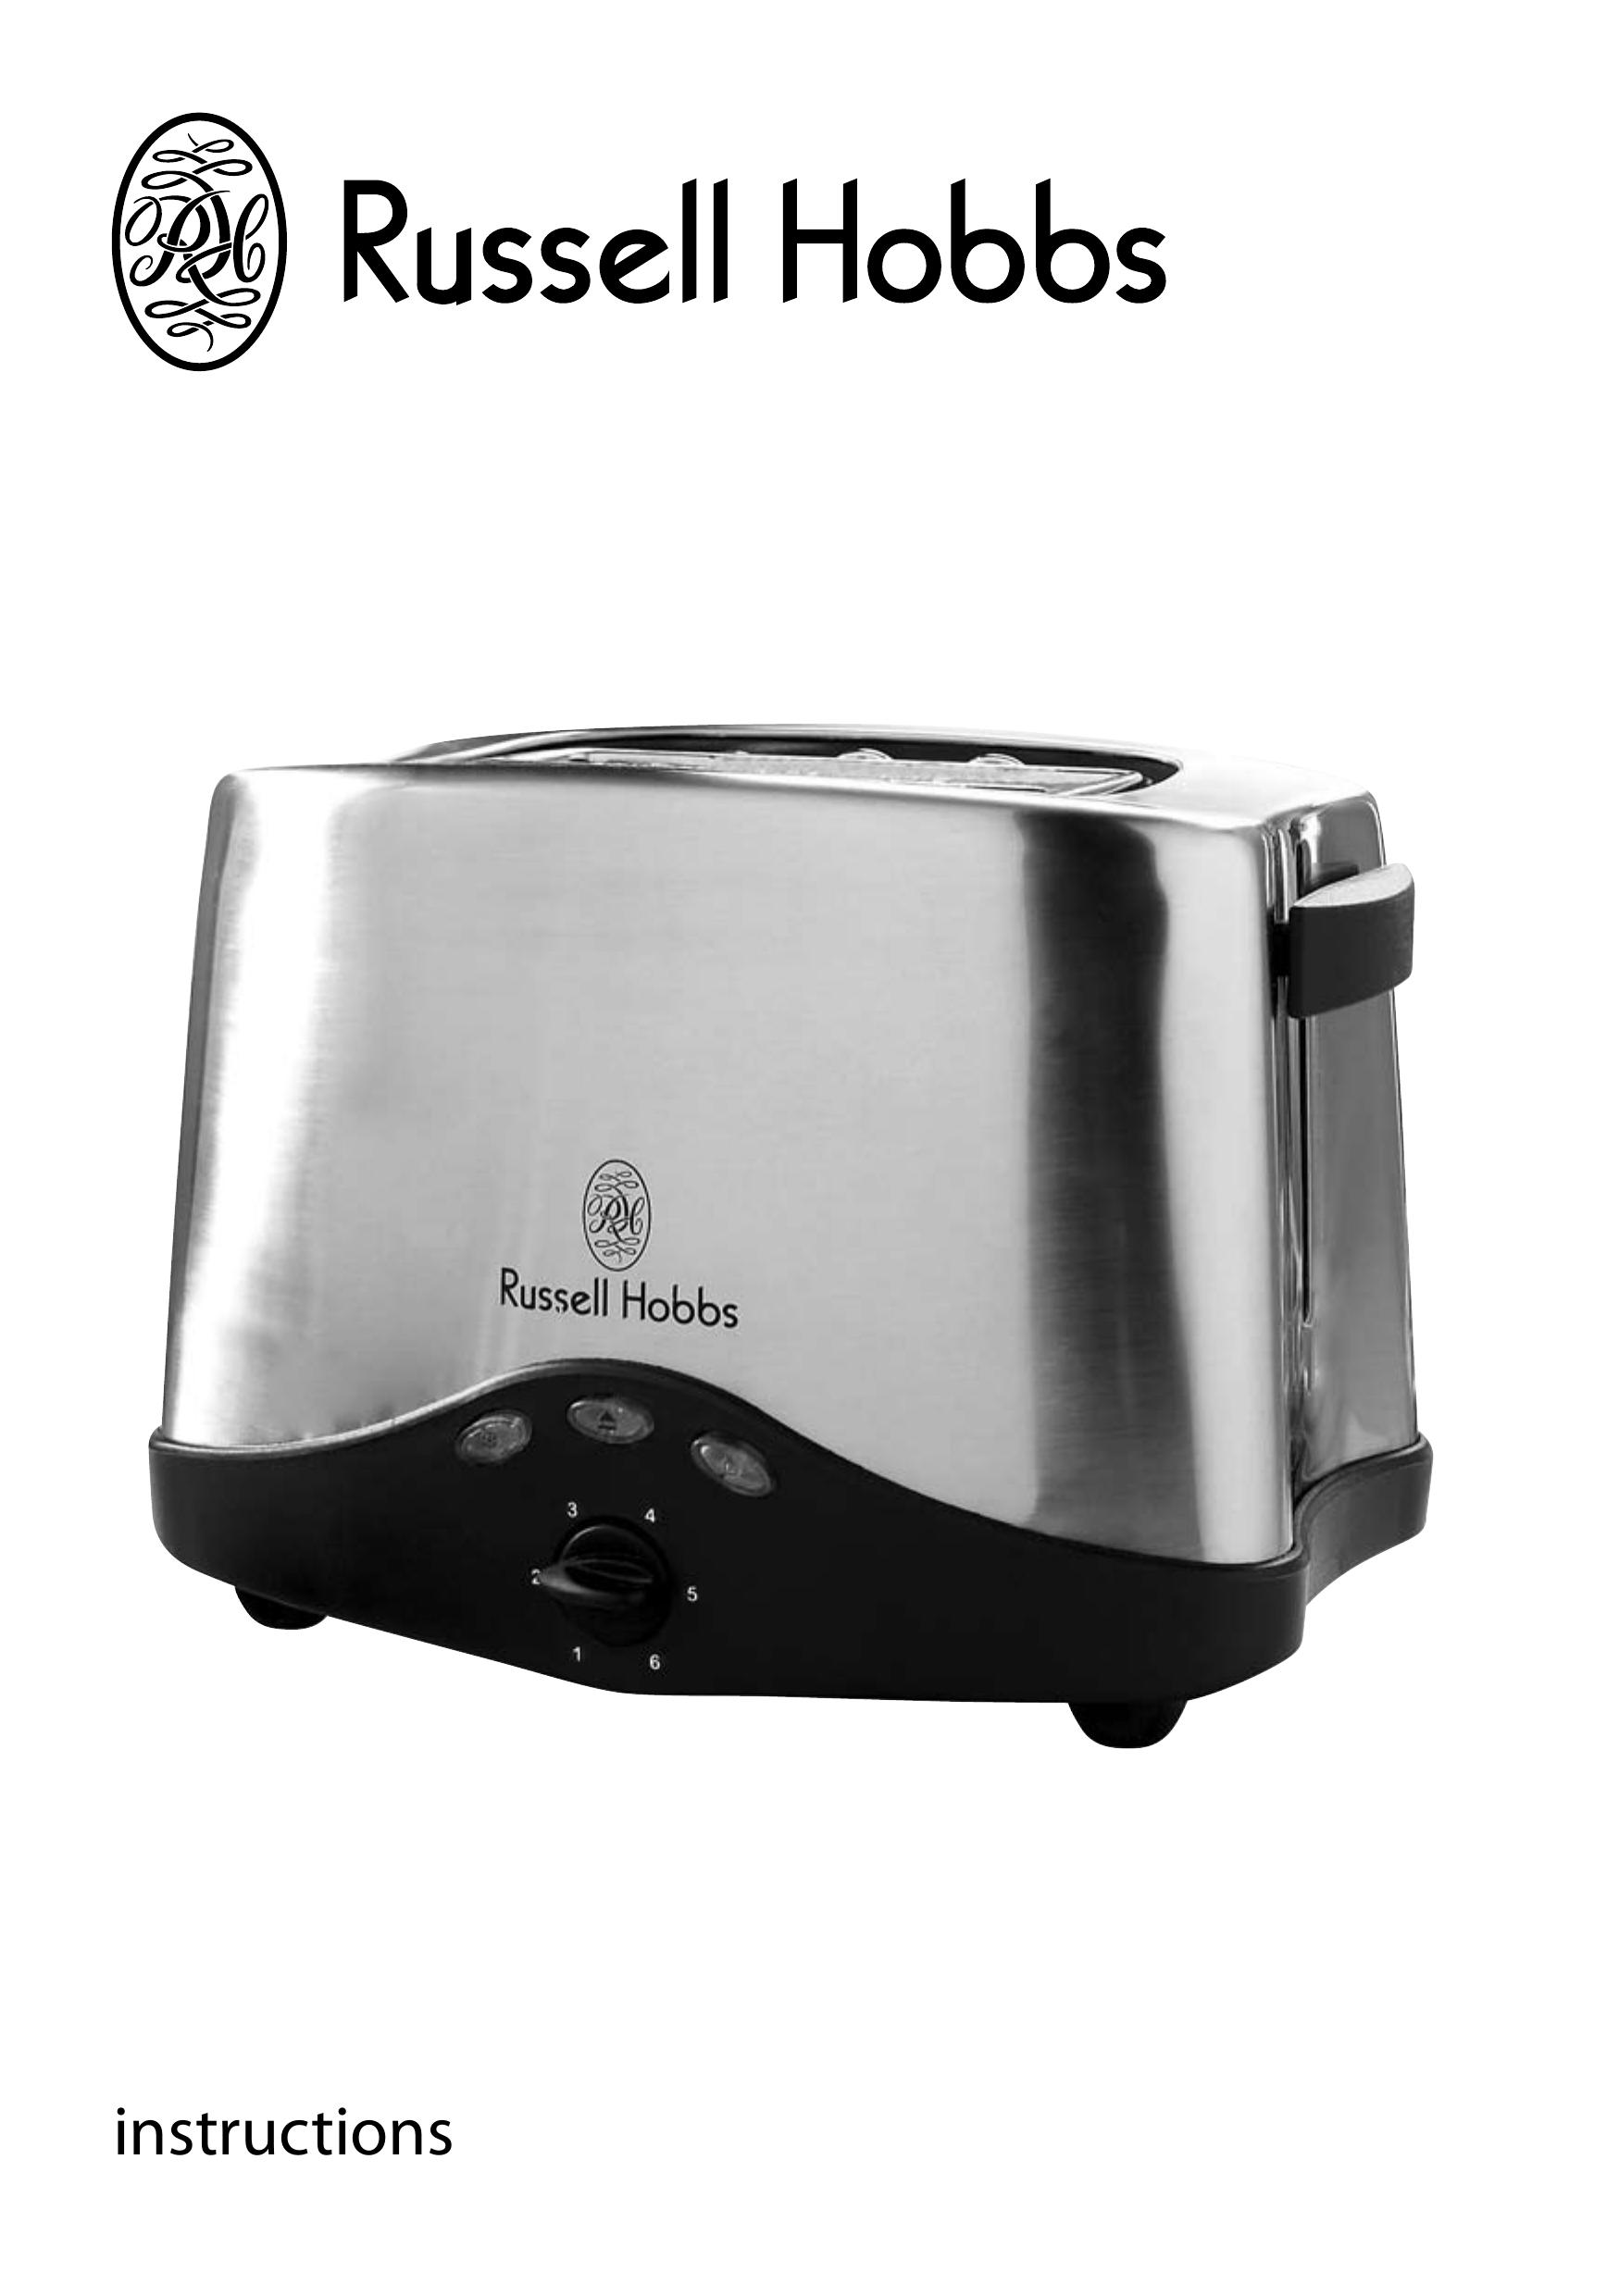 Russell Hobbs L5061620 Toaster User Manual